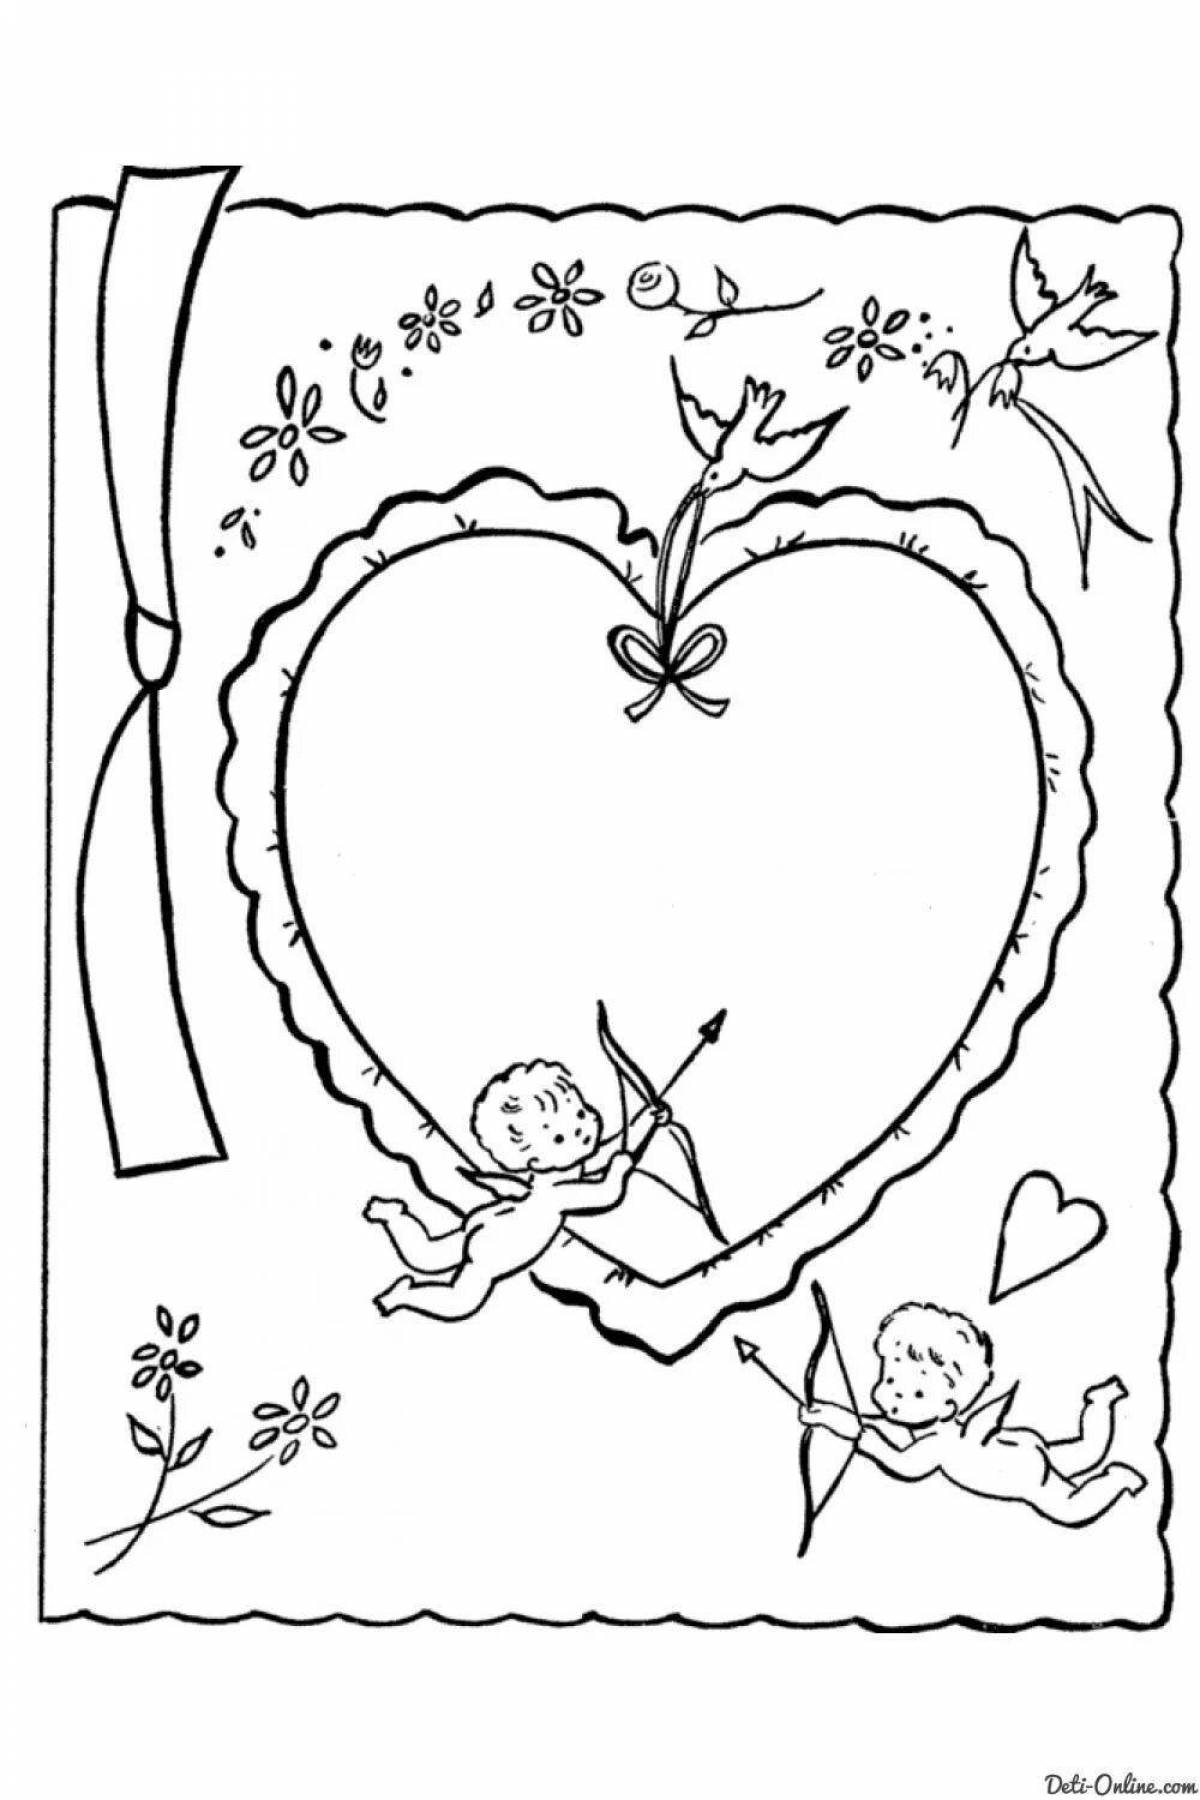 Inspiring valentine coloring book for valentine's day for kids